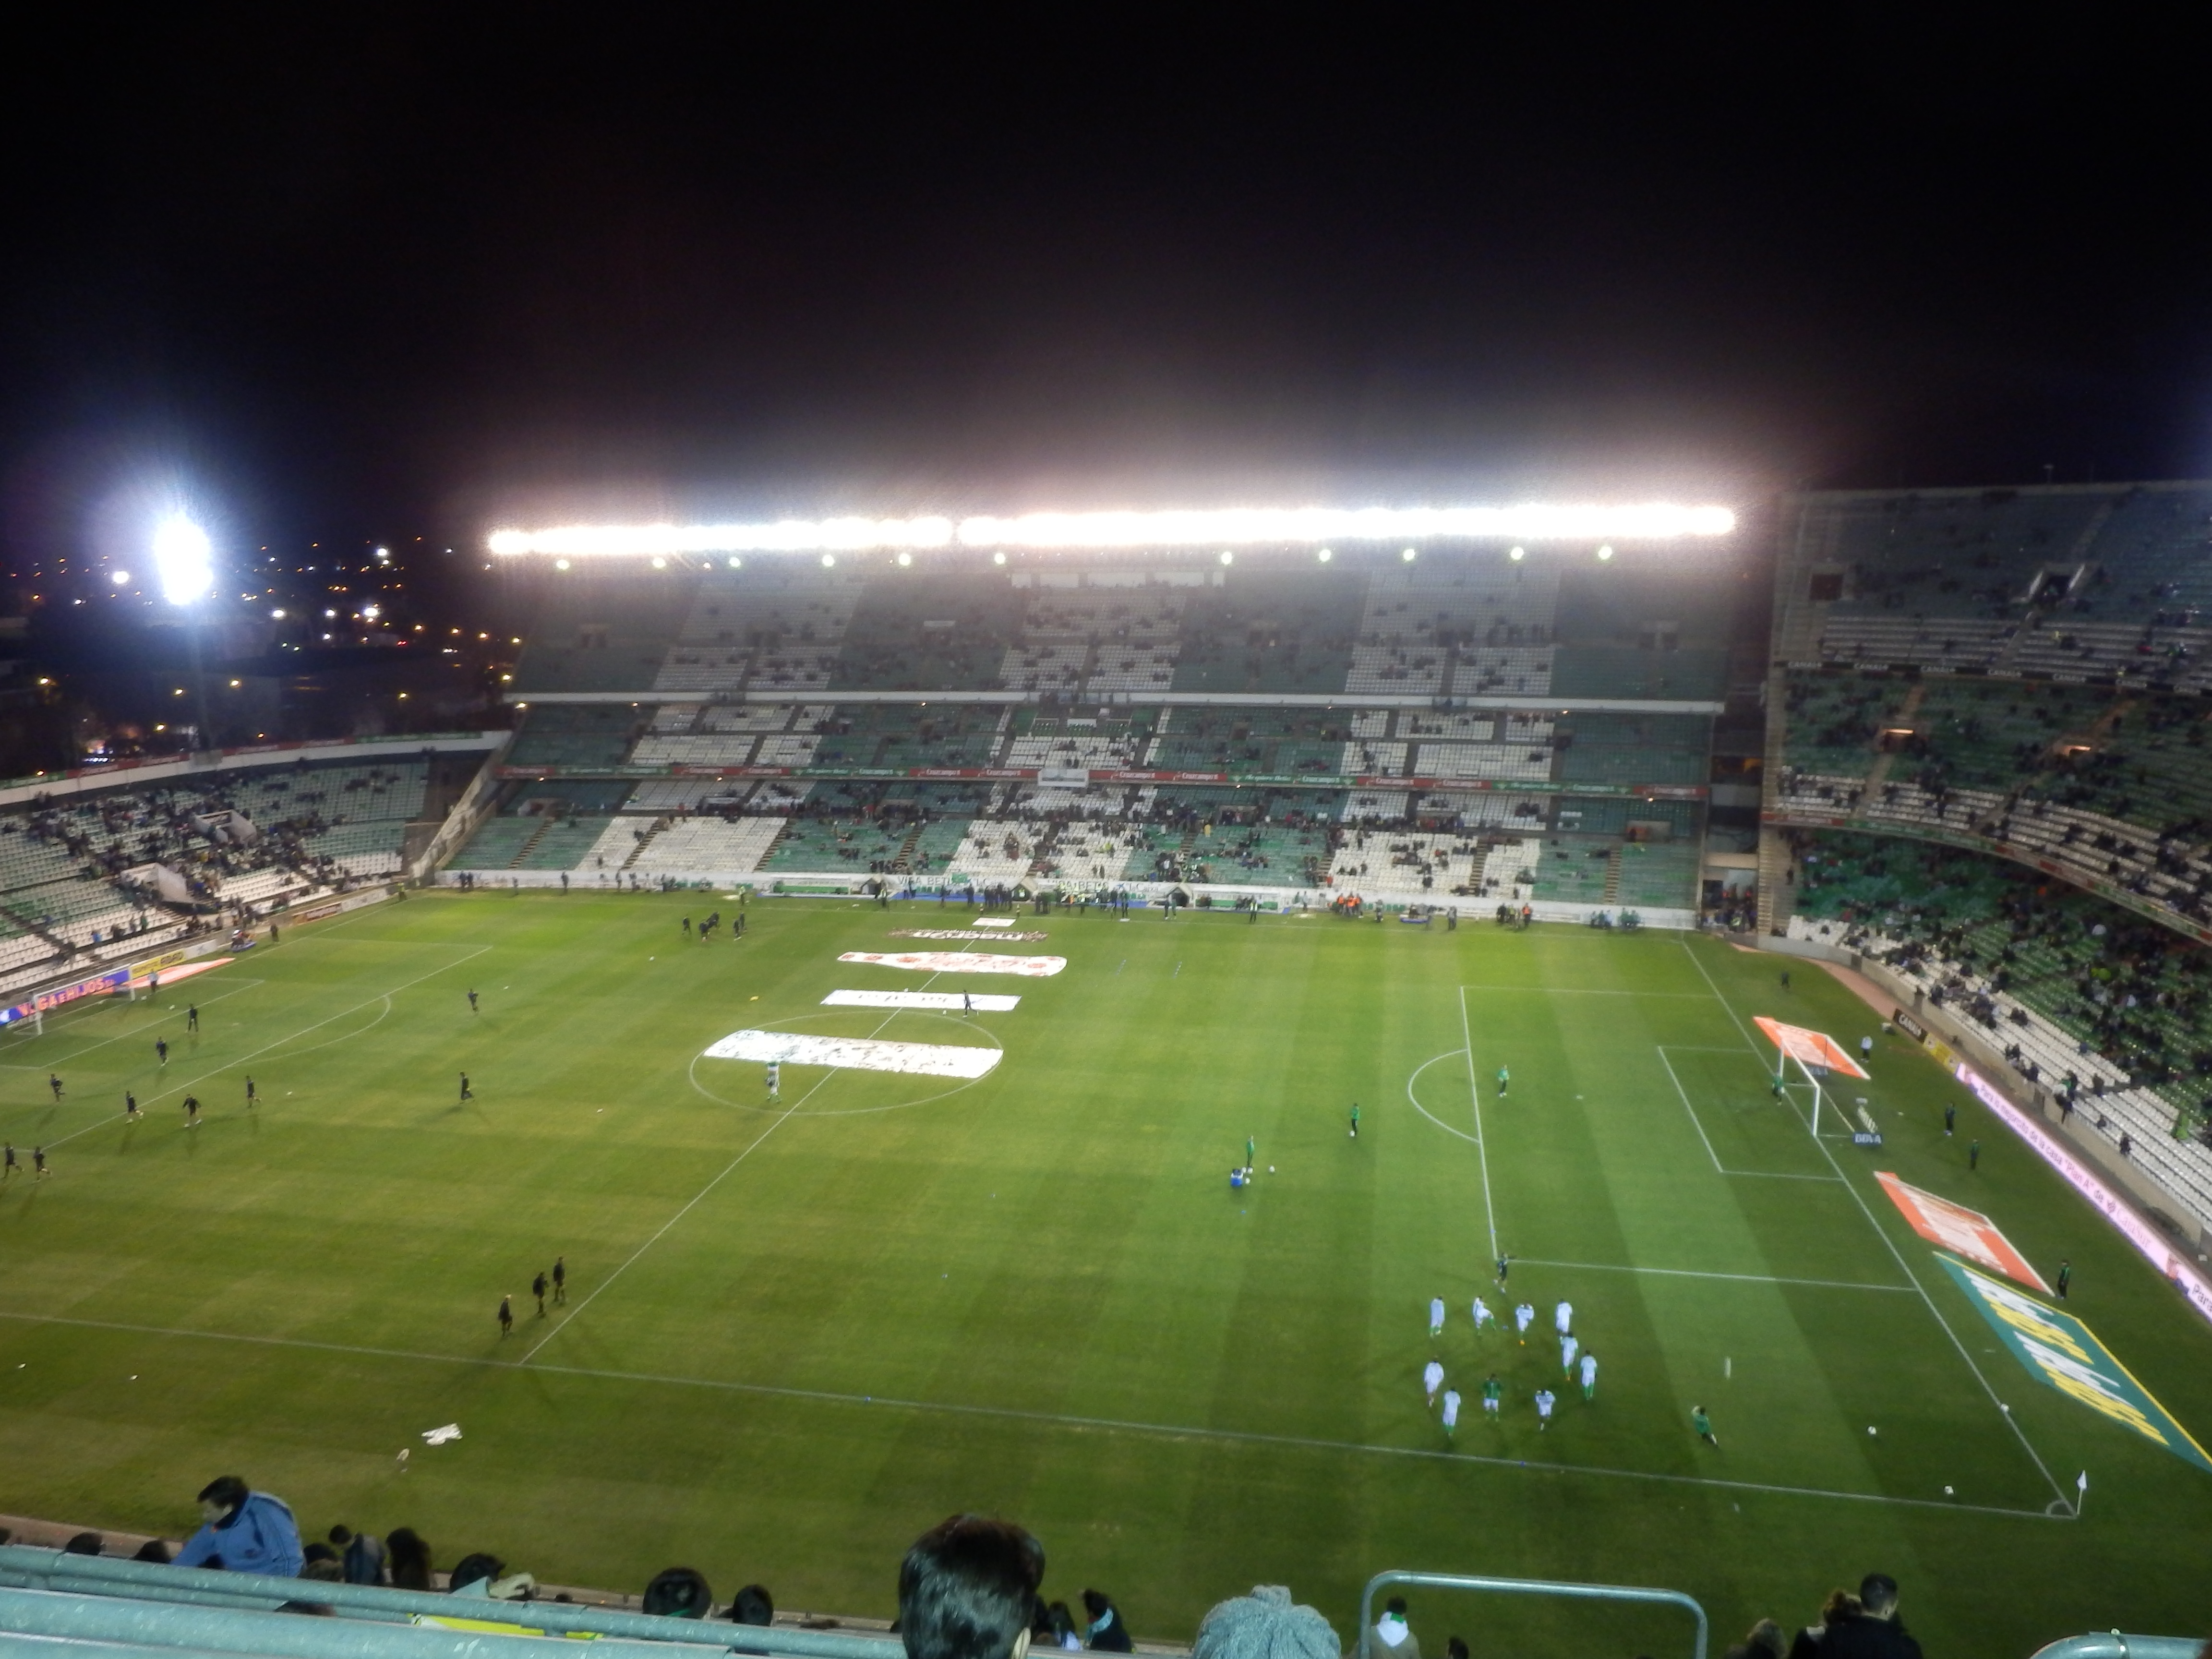 Real Betis V Real Valladolid | A year in Seville4608 x 3456